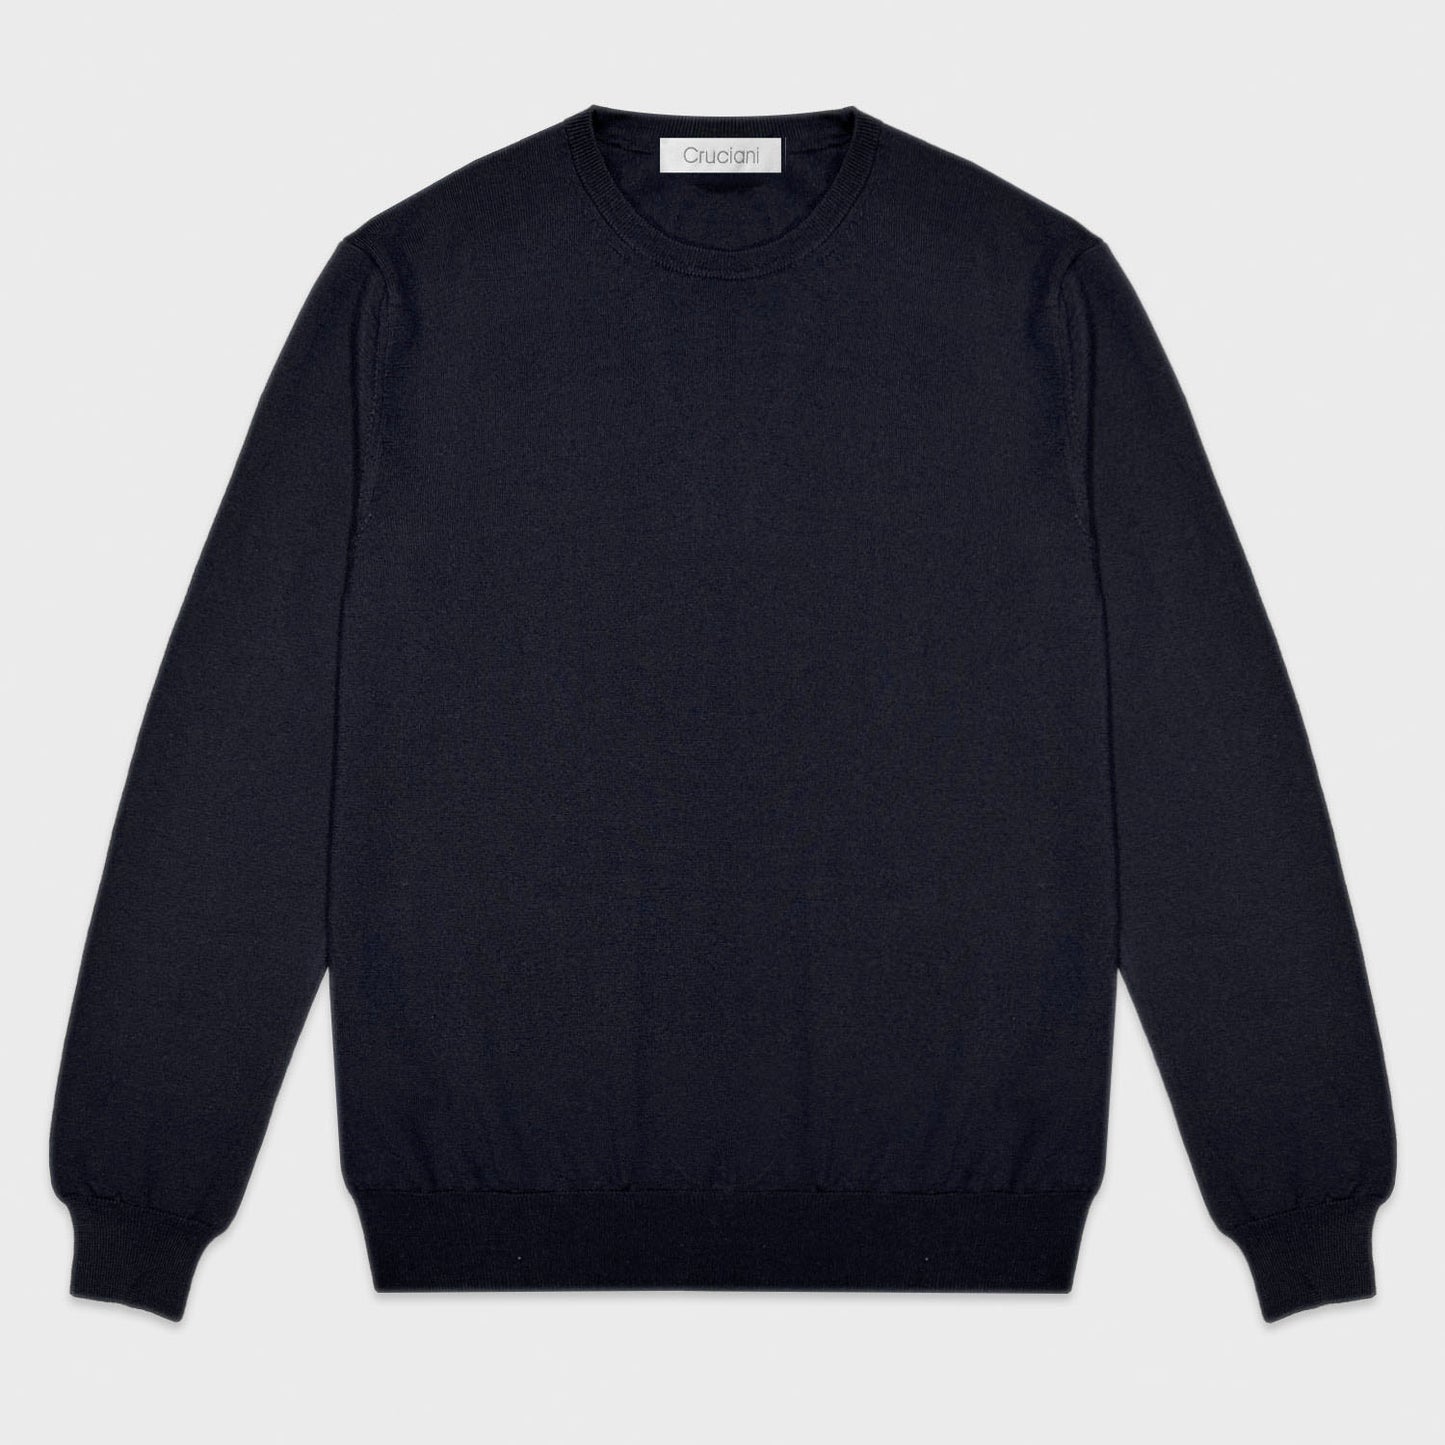 Navy Blue Crewneck Merino Wool Sweater Cruciani. This is the timeless sweater under jacket. Classic blue sweater merino wool, crewneck model, classic regular fit, finished with the 2cm small edge ribbed crewneck detail, made in Italy by Cruciani